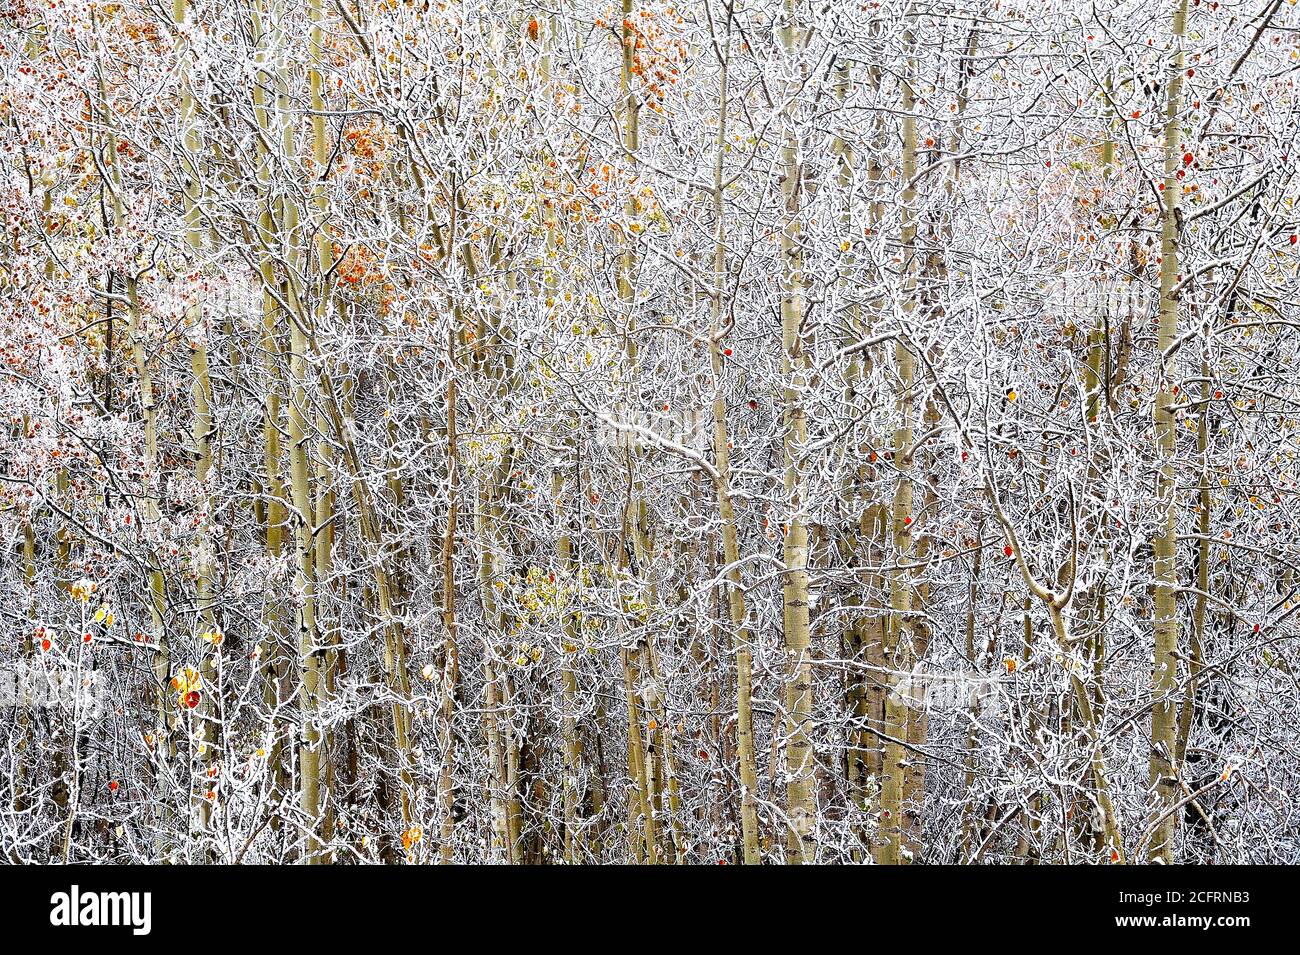 An autumn image of frosted aspen trees in rural Alberta Canada Stock Photo